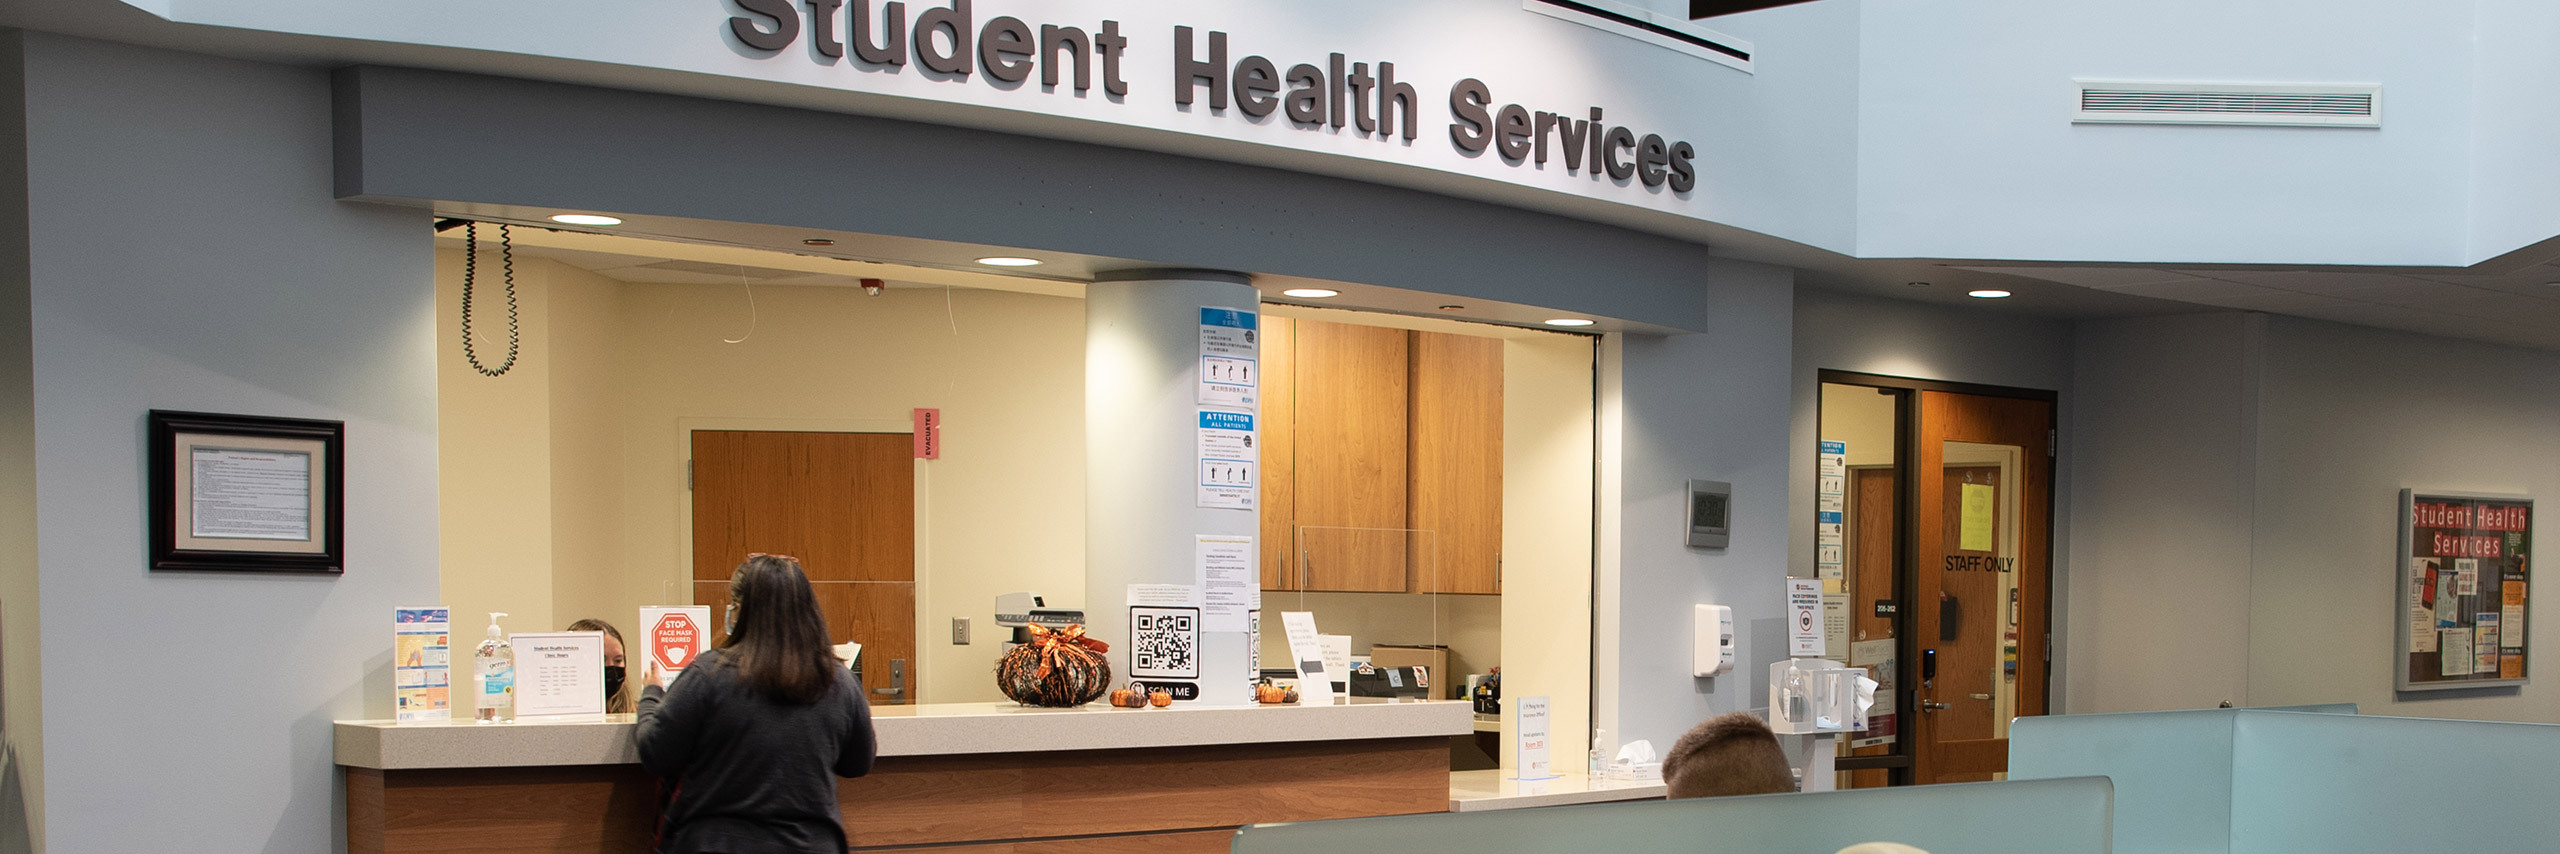 Student Health Services reception.